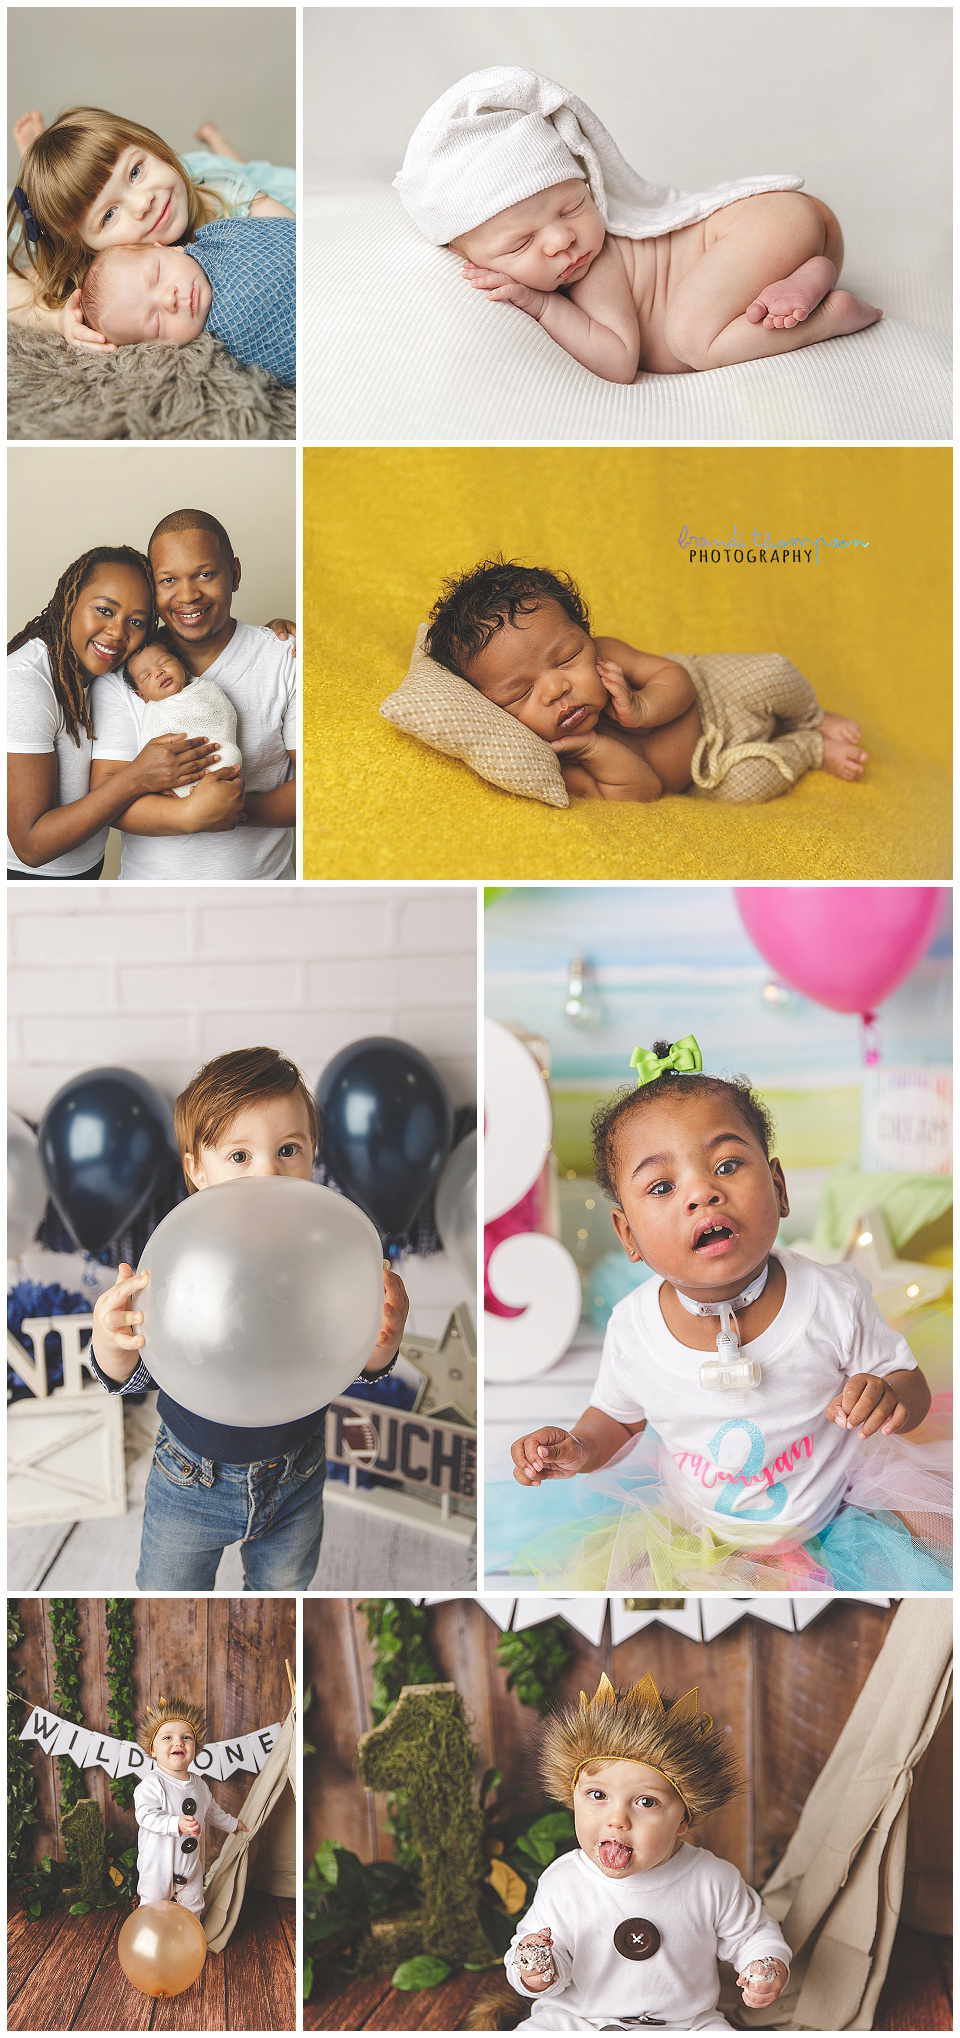 A collage of newborn, first birthday and toddler photographs